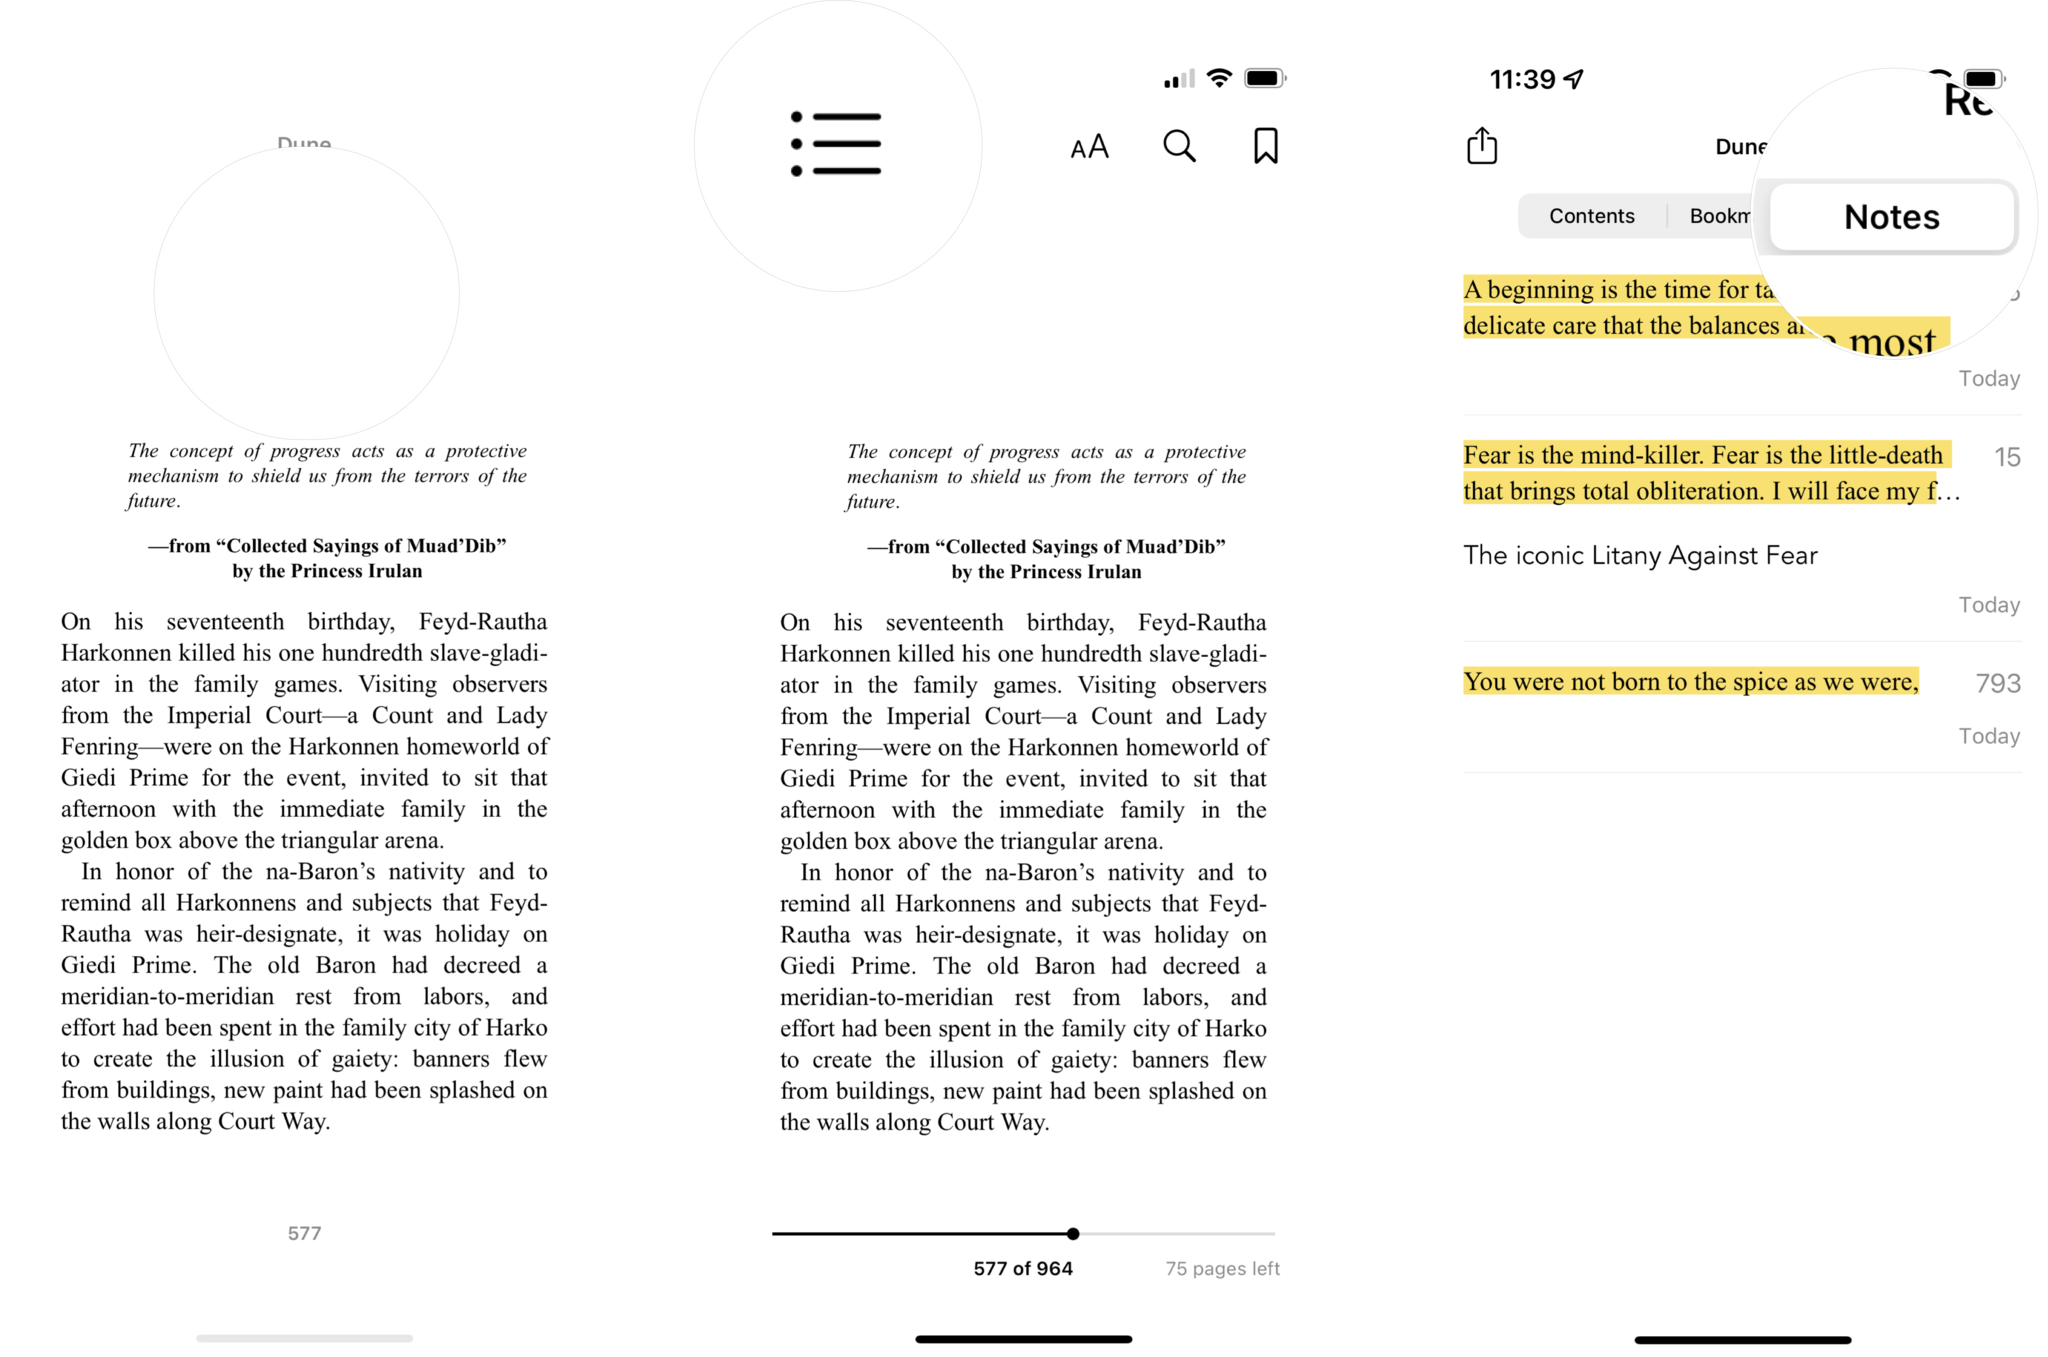 How to review notes in a book in Apple Books: tap a blank part of the page to bring up the controls, tap the list icon, tap the Notes tab